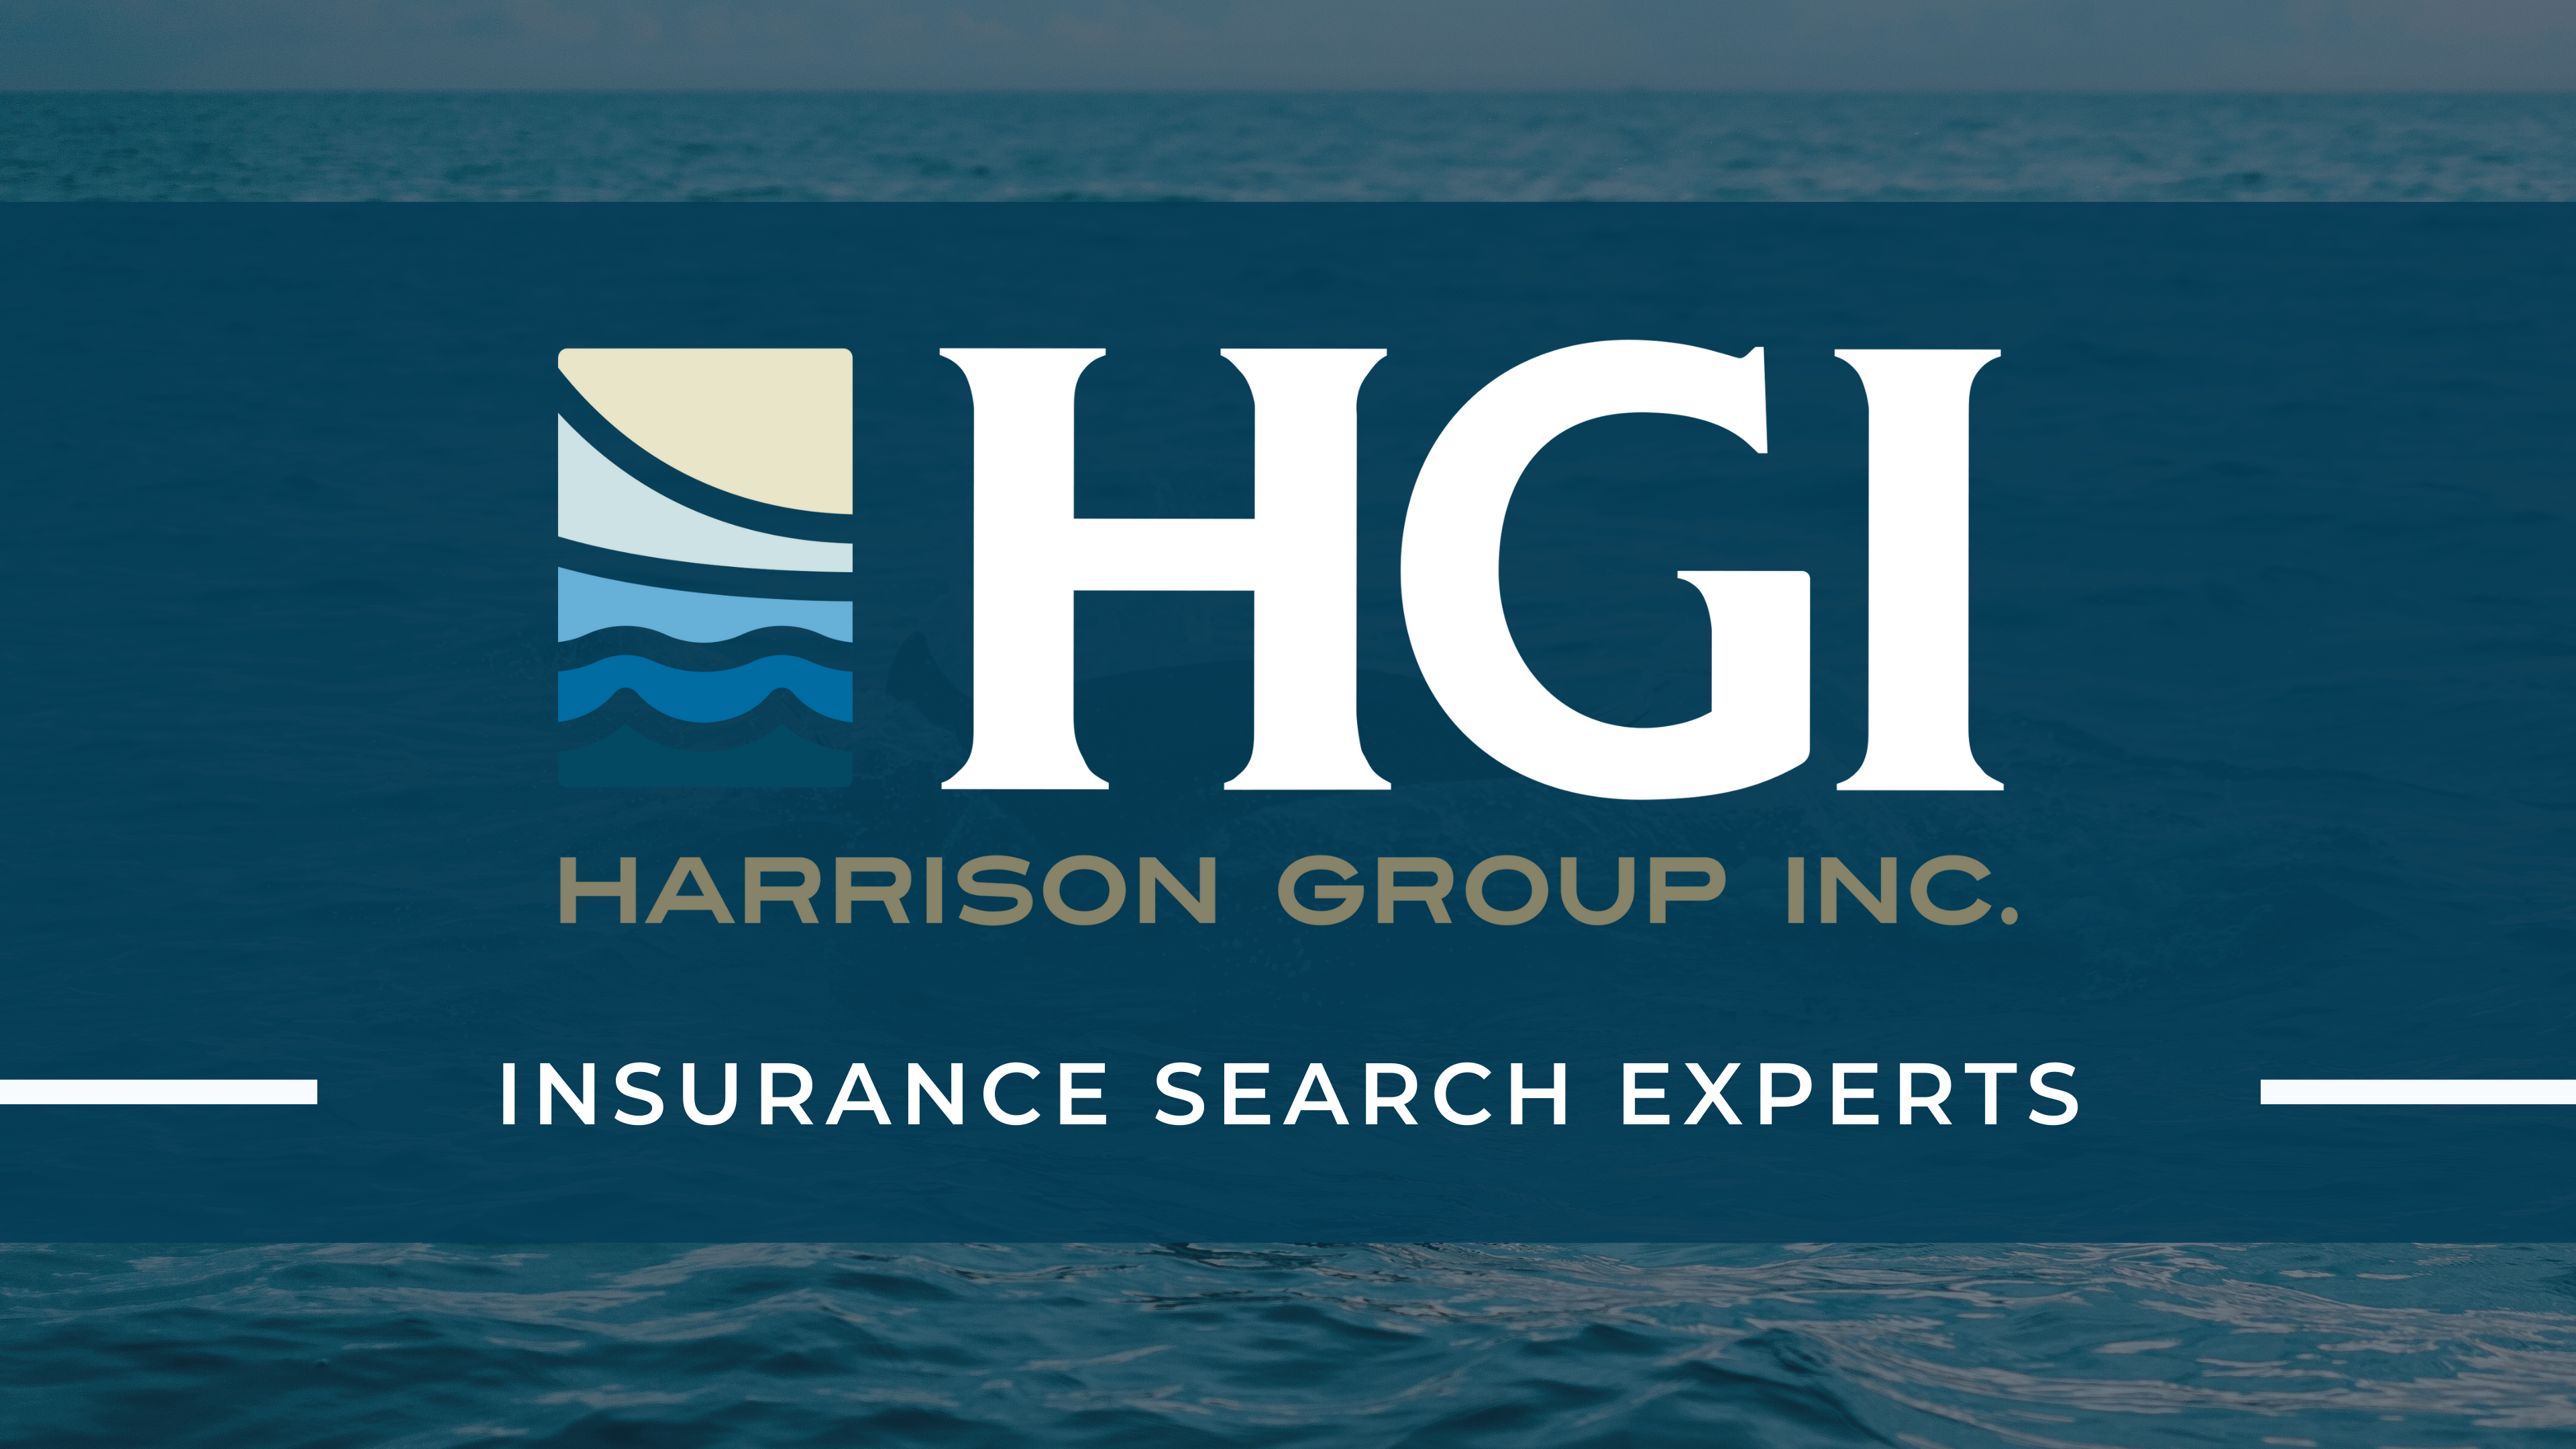 https://www.harrisongrp.com/wp-content/uploads/2022/03/HGI-Insurance-Search-Experts.png